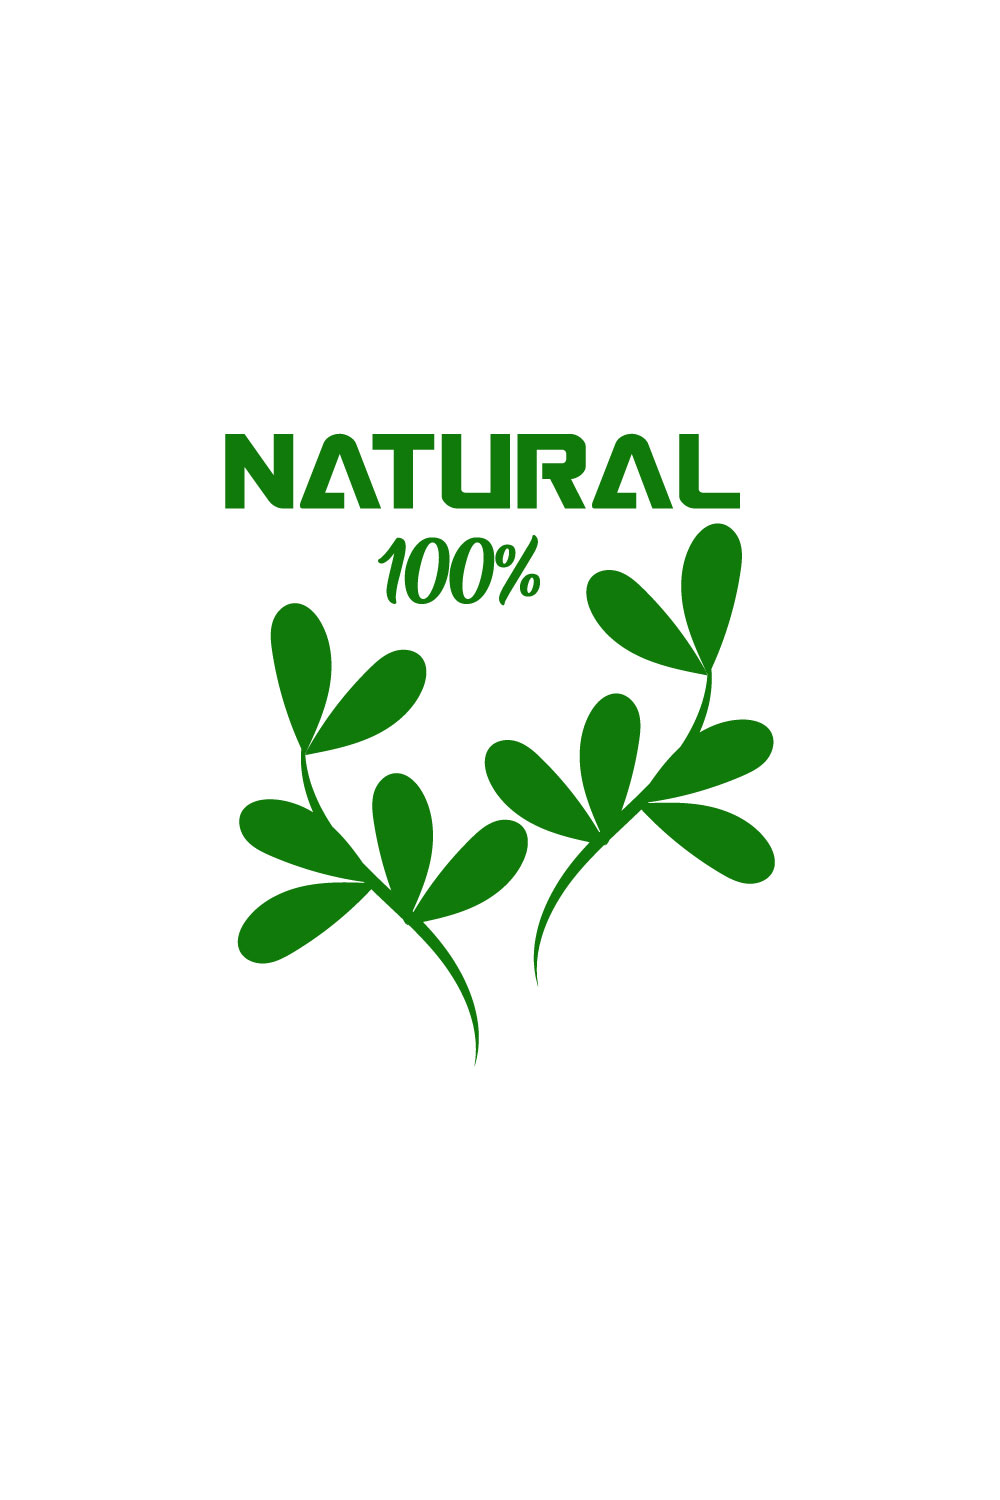 Free eco food logo pinterest preview image.